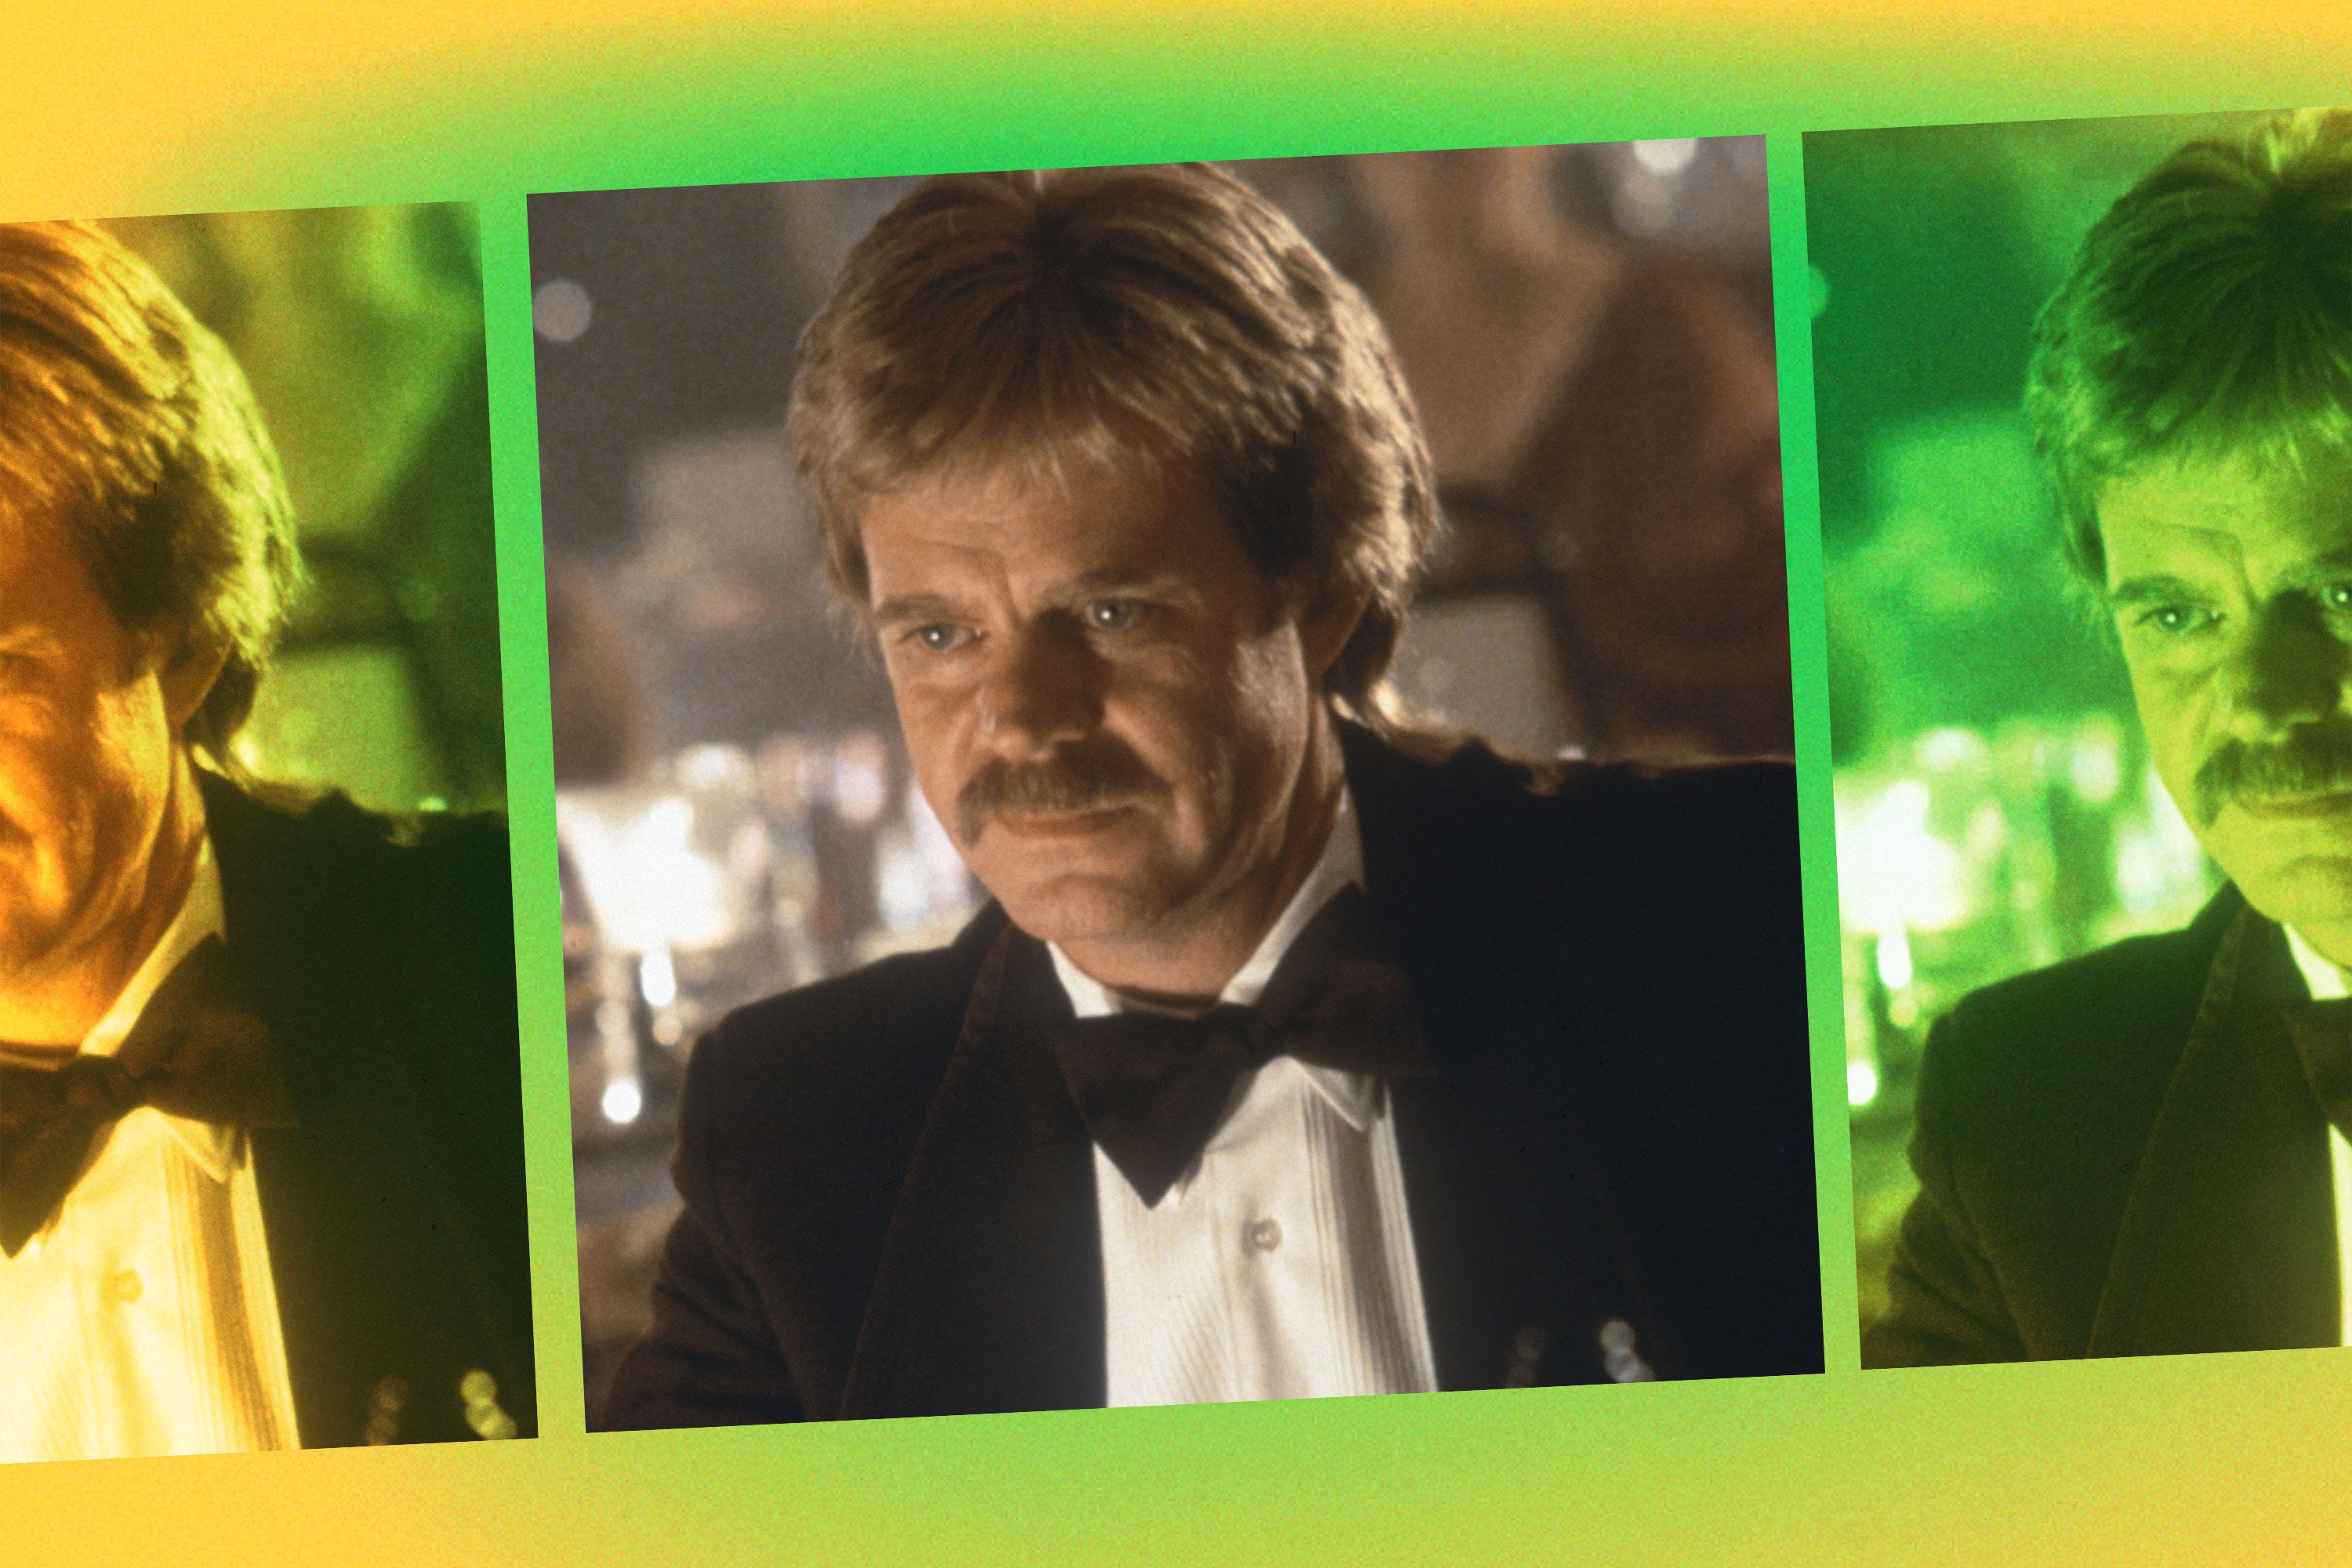 Teub X Porn 11yers Videos - William H. Macy Answers Our Questions About 'Boogie Nights'